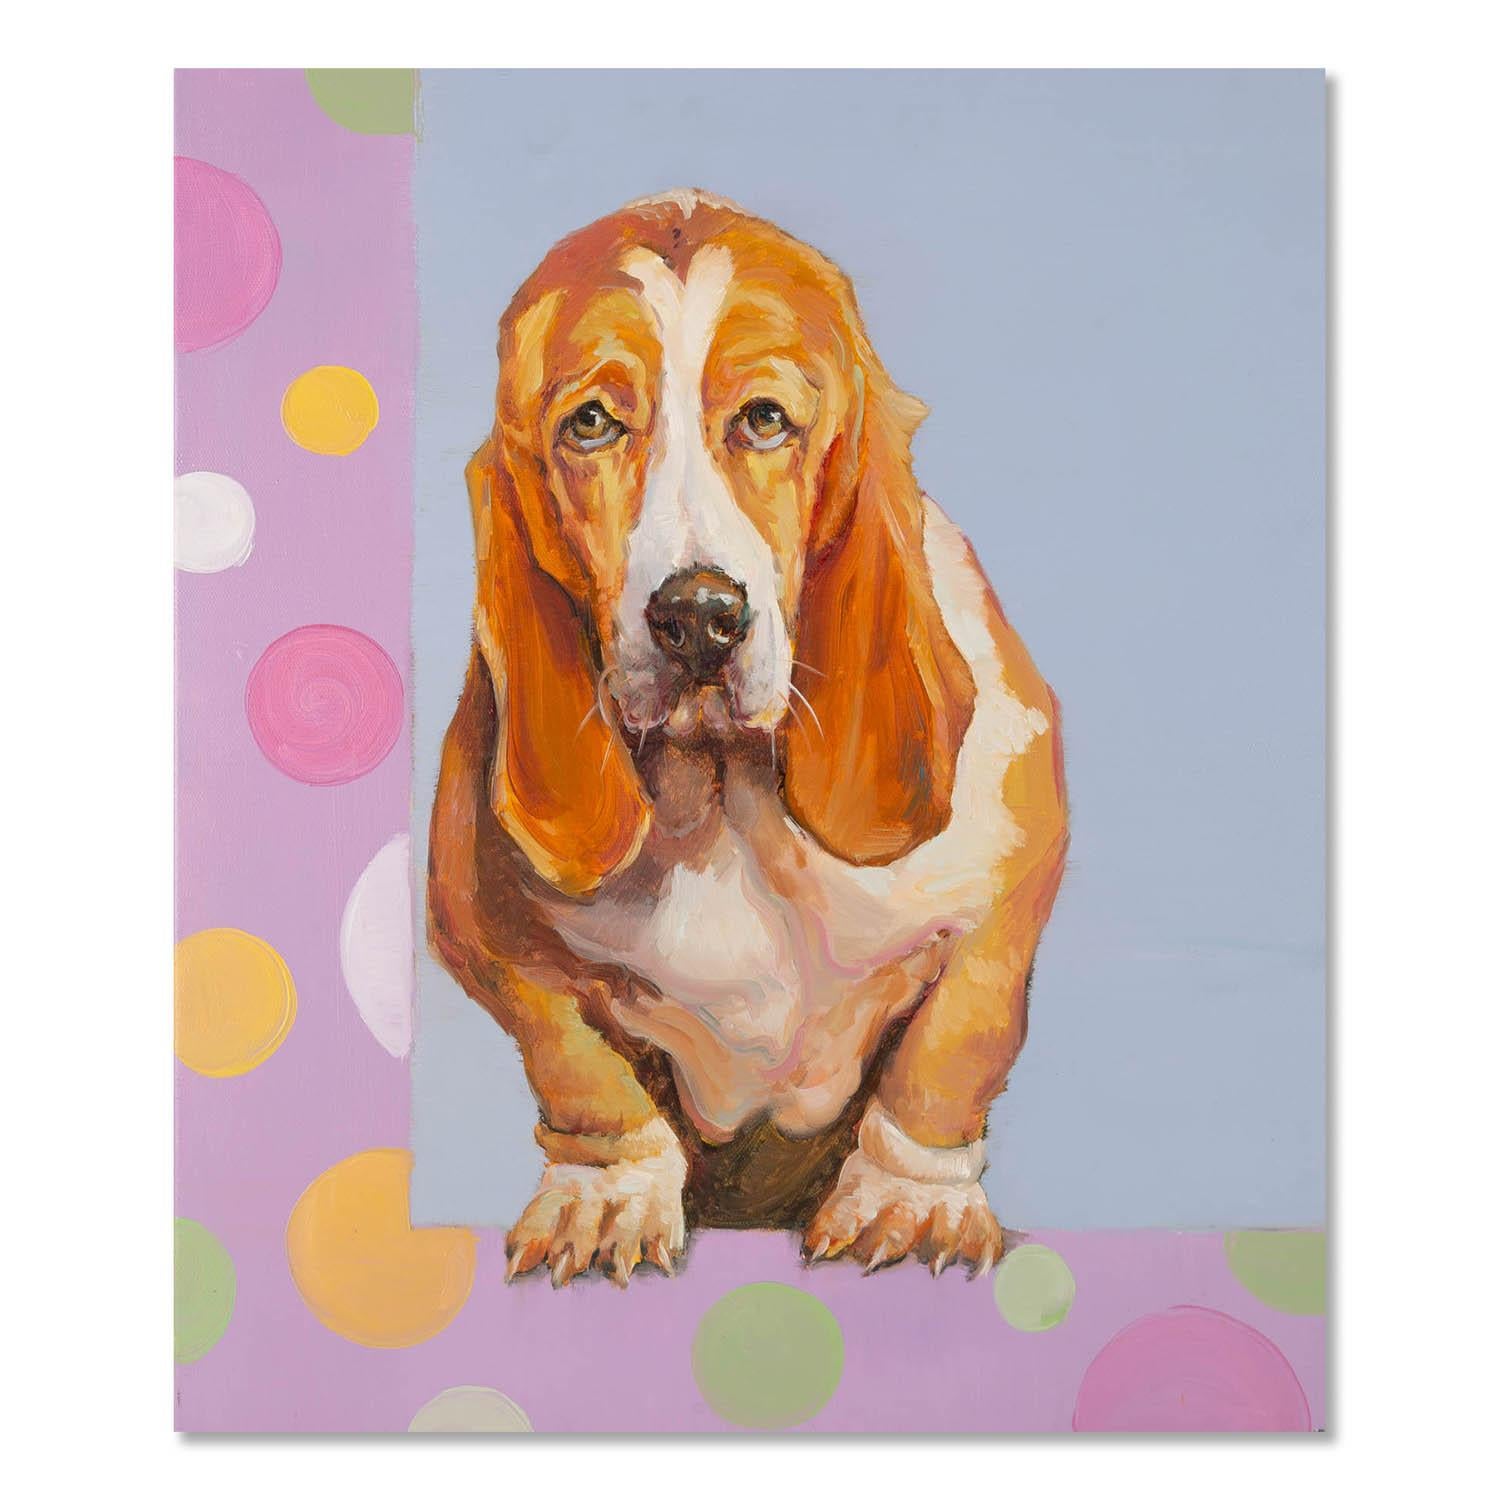  Title: Basset Hound
 Medium: Oil on canvas
 Size: 23 x 19 inches
 Frame: Framing options available!
 Condition: The painting appears to be in excellent condition.
 
 Year: 2000 Circa
 Artist: Yanmin Zhang
 Signature: 
 Signature Location: 
